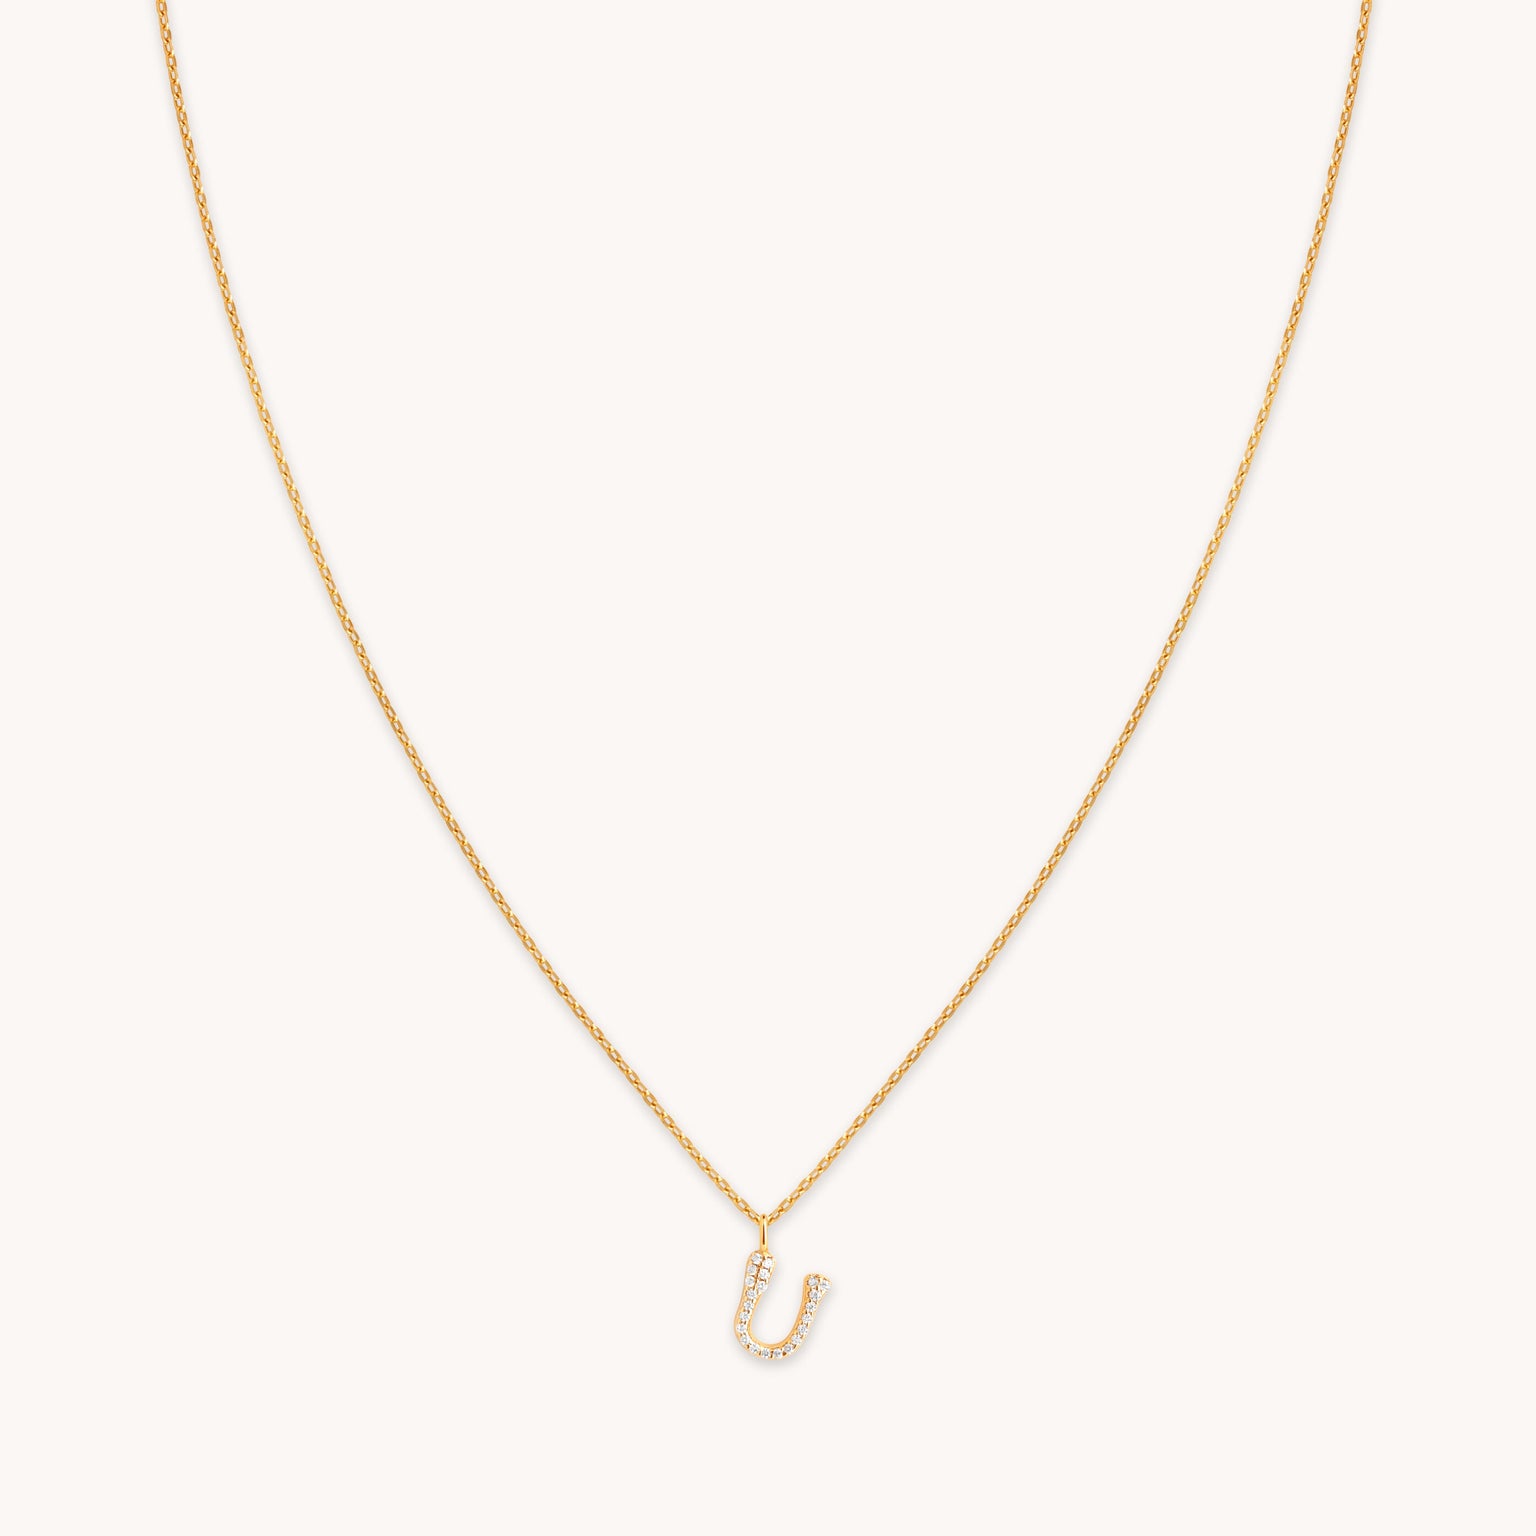 U Initial Pavé Pendant Necklace in Gold